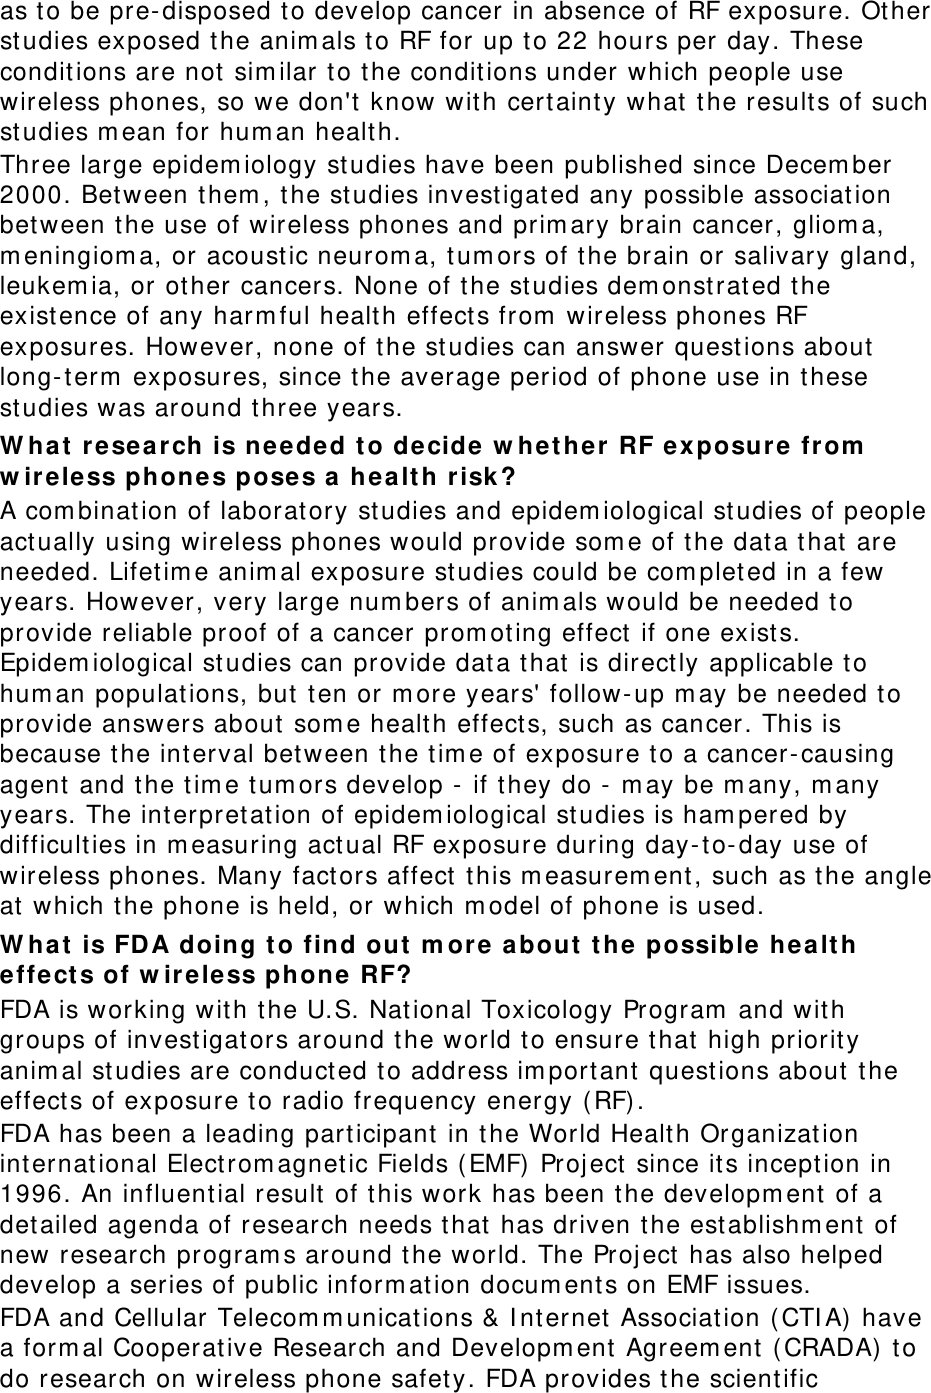 as to be pre-disposed t o develop cancer in absence of RF exposure. Ot her studies exposed t he anim als t o RF for up t o 22 hours per day. These conditions are not  sim ilar t o the conditions under which people use wireless phones, so we don&apos;t  know with cert aint y what  t he result s of such studies m ean for hum an healt h. Three large epidem iology st udies have been published since Decem ber 2000. Between t hem , t he st udies invest igat ed any possible associat ion between the use of wireless phones and prim ary brain cancer, gliom a, m eningiom a, or acoust ic neurom a, t um ors of the brain or salivary gland, leukem ia, or other cancers. None of t he st udies dem onstrat ed t he exist ence of any harm ful health effect s from  wireless phones RF exposur es. However, none of the st udies can answer quest ions about  long-term  exposures, since t he average period of phone use in t hese studies was around three years. W ha t  re sea rch is ne eded  t o decide w het her  RF e xposure fr om  w ir eless phone s poses a  h ealt h risk ? A com bination of laboratory studies and epidem iological st udies of people act ually using wireless phones w ould provide som e of t he data t hat are needed. Lifet im e anim al exposure st udies could be com pleted in a few years. How ever , very large num bers of anim als would be needed t o provide reliable proof of a cancer prom ot ing effect  if one exist s. Epidem iological st udies can pr ovide dat a t hat  is direct ly applicable t o hum an populations, but  ten or m ore years&apos; follow-up m ay be needed t o provide answers about  som e health effects, such as cancer. This is because the int erval between t he t ime of exposure t o a cancer-causing agent and the t im e t um ors develop -  if t hey do - m ay be m any, m any years. The int erpretation of epidem iological st udies is ham pered by difficulties in m easuring act ual RF exposure during day-t o-day use of wireless phones. Many factors affect  this m easurem ent , such as the angle at which t he phone is held, or which m odel of phone is used. W ha t  is FDA doing t o find out  m ore a bout  t he possible  hea lt h effe ct s of w ir eless phone  RF? FDA is working with the U.S. Nat ional Toxicology Program  and with groups of invest igat ors around t he world to ensure that  high priority anim al st udies are conduct ed to address im portant  quest ions about t he effect s of exposure t o radio frequency ener gy (RF). FDA has been a leading part icipant  in the World Health Or ganizat ion int ernational Elect rom agnetic Fields ( EMF)  Proj ect  since it s incept ion in 1996. An influent ial result of t his wor k has been the developm ent  of a detailed agenda of r esearch needs t hat  has driven t he est ablishm ent of new research program s around t he world. The Proj ect  has also helped develop a series of public inform at ion docum ent s on EMF issues. FDA and Cellular Telecom m unicat ions &amp; I nt ernet  Association ( CTI A)  have a form al Cooperative Resear ch and Developm ent Agreem ent  ( CRADA)  to do research on wireless phone safet y. FDA provides t he scient ific 